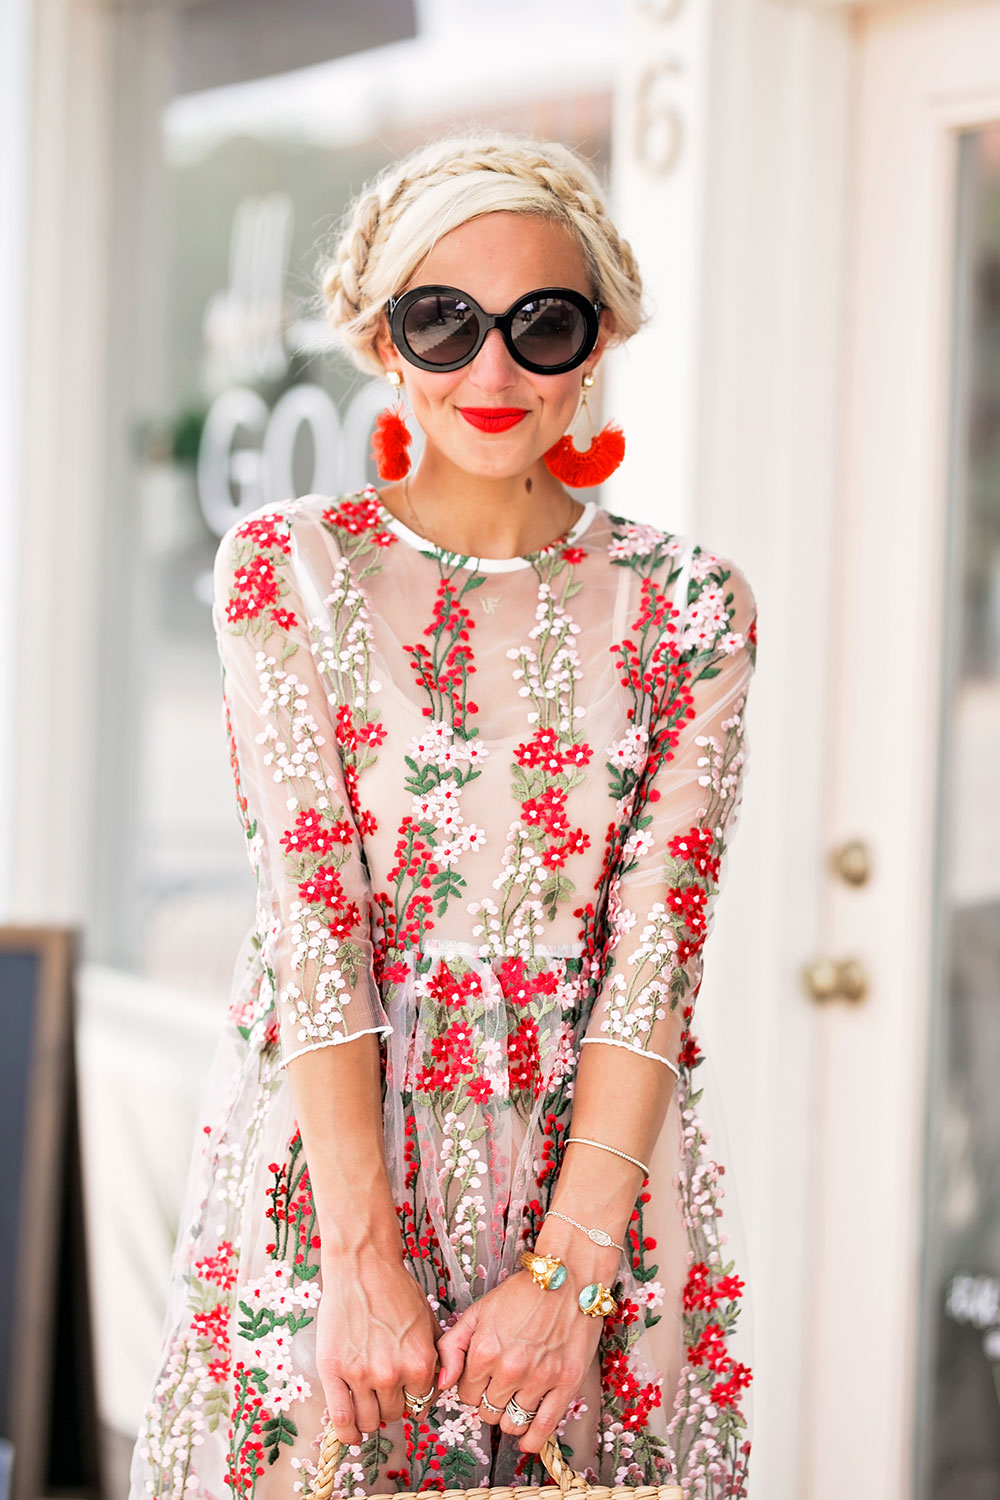 embroidered floral dress